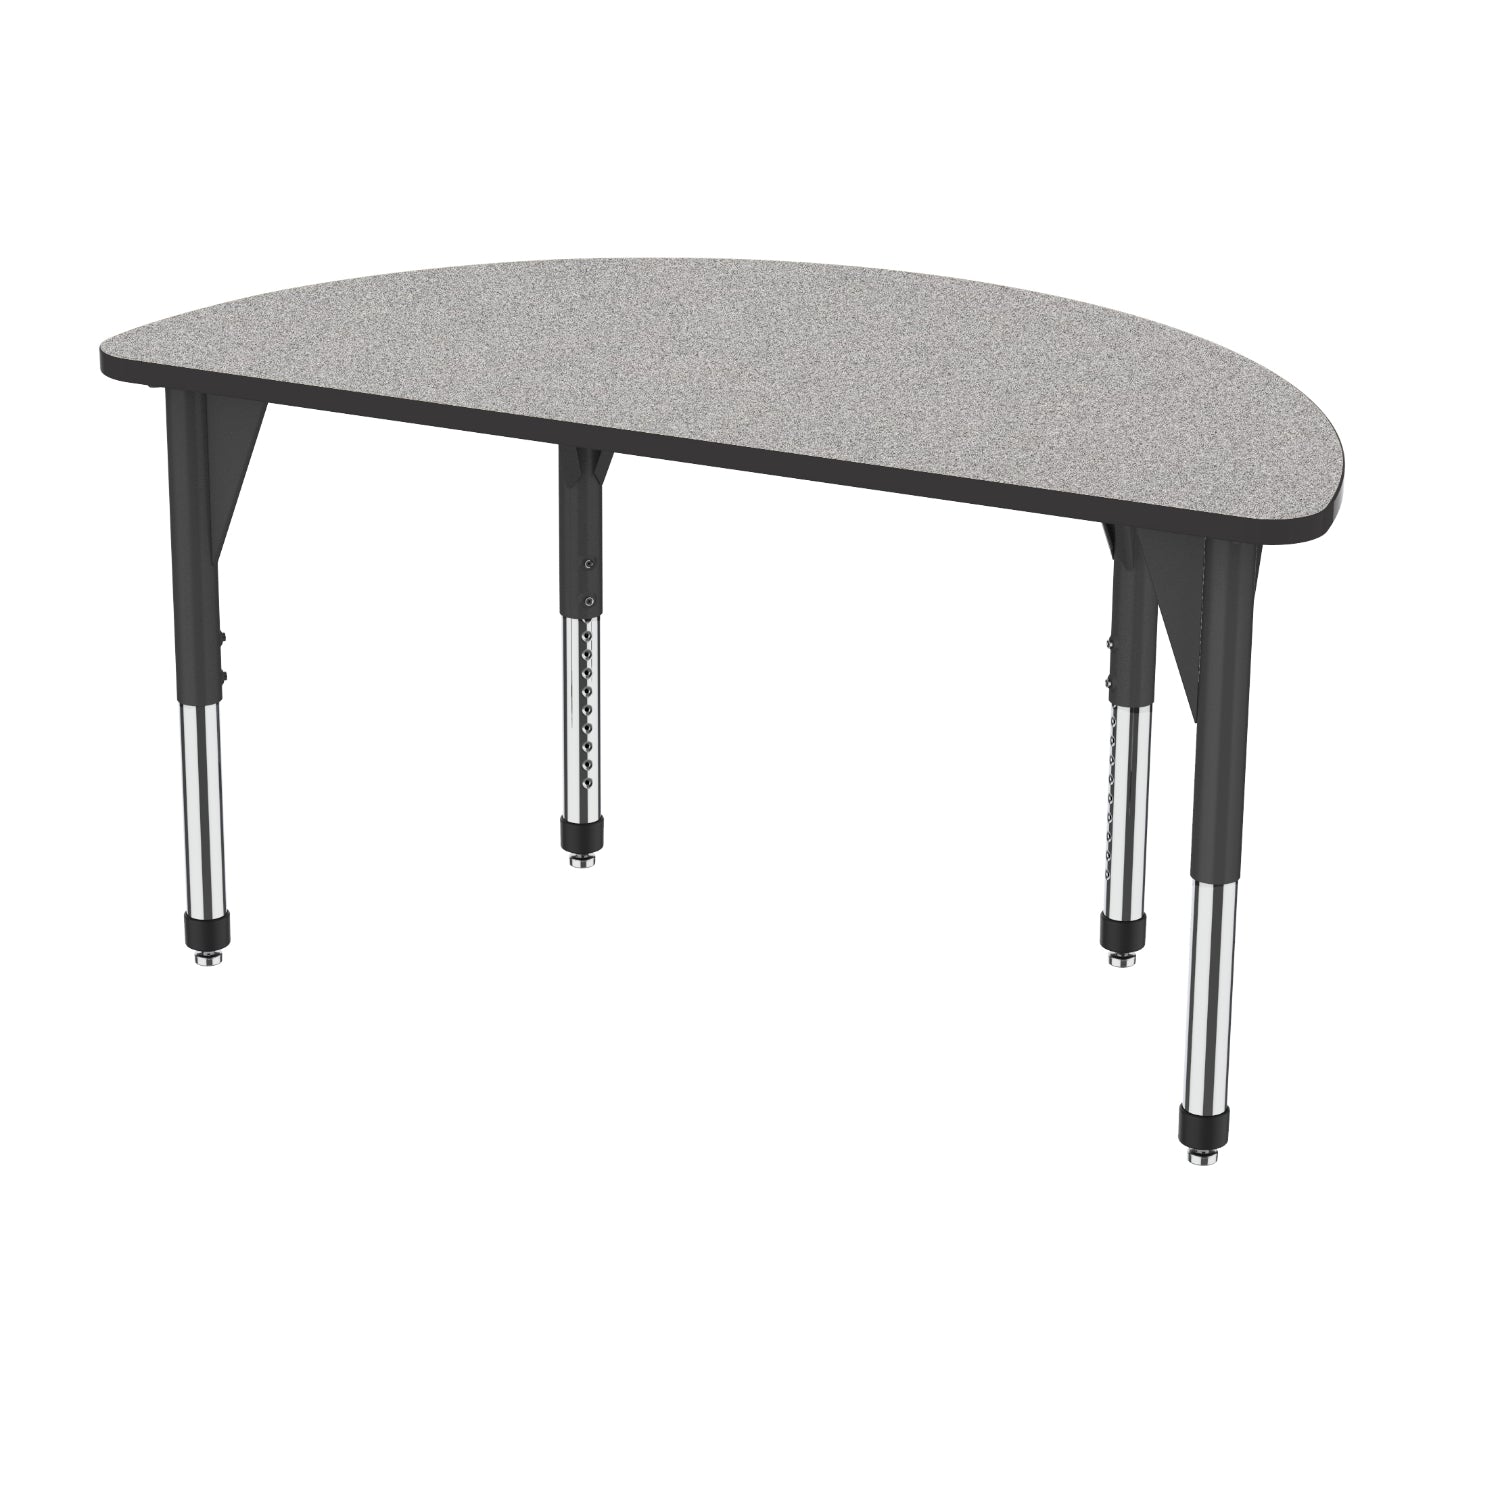 Premier Sitting Height Collaborative Classroom Table, 60" Half Round